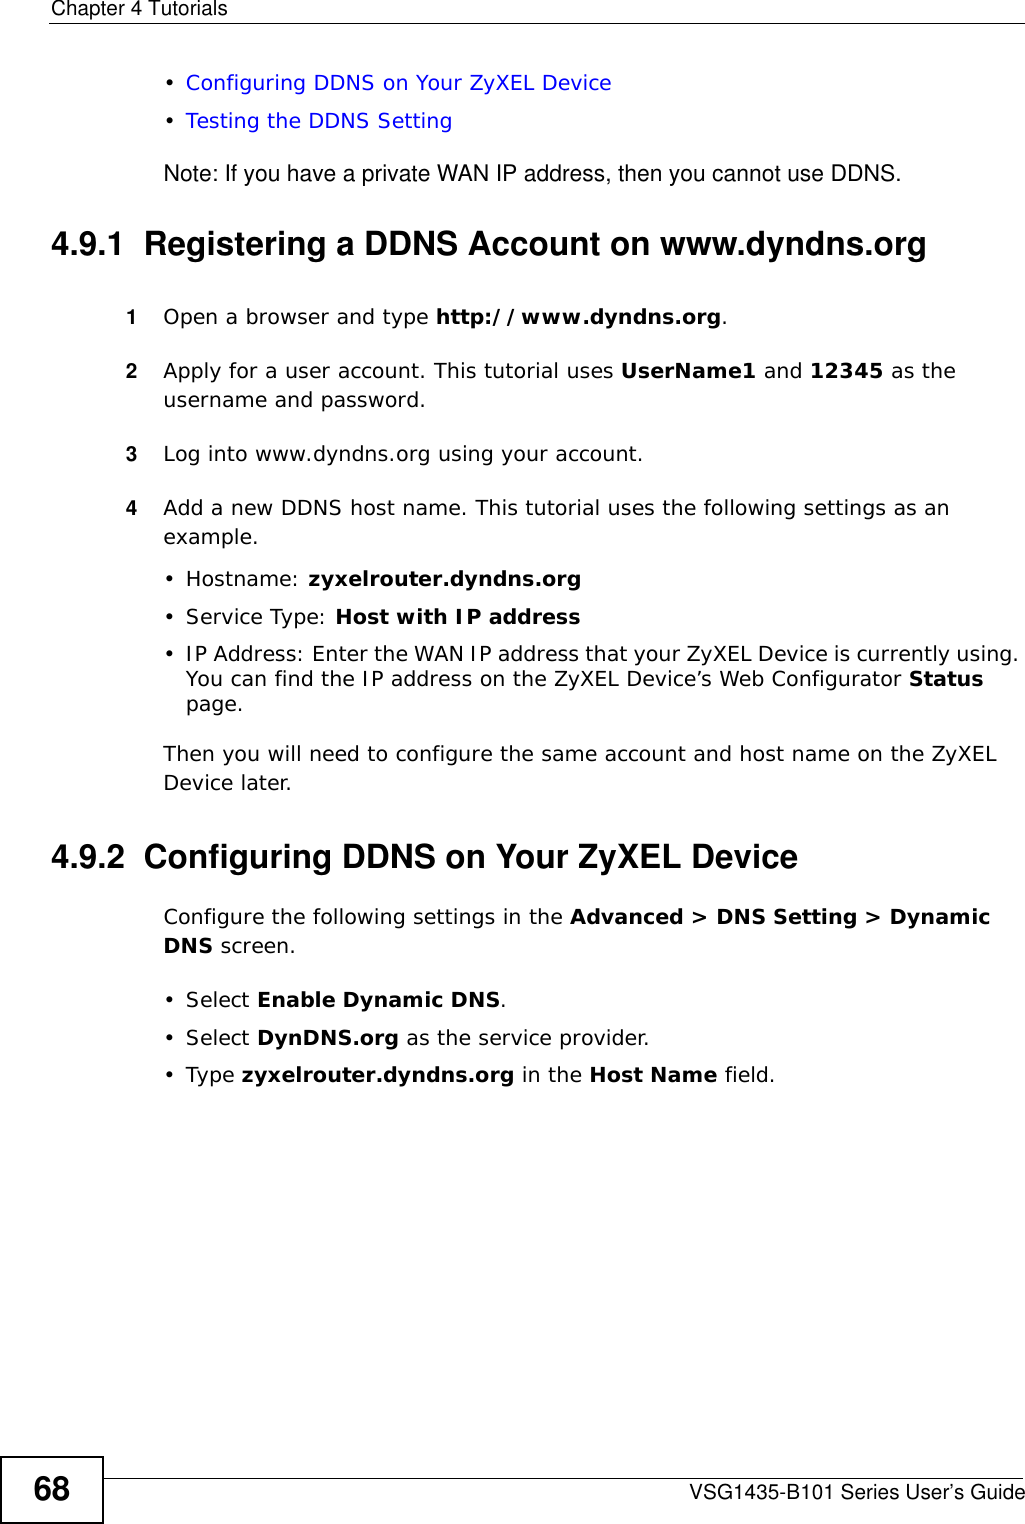 Chapter 4 TutorialsVSG1435-B101 Series User’s Guide68•Configuring DDNS on Your ZyXEL Device•Testing the DDNS SettingNote: If you have a private WAN IP address, then you cannot use DDNS.4.9.1  Registering a DDNS Account on www.dyndns.org1Open a browser and type http://www.dyndns.org.2Apply for a user account. This tutorial uses UserName1 and 12345 as the username and password.3Log into www.dyndns.org using your account.4Add a new DDNS host name. This tutorial uses the following settings as an example.• Hostname: zyxelrouter.dyndns.org•Service Type: Host with IP address• IP Address: Enter the WAN IP address that your ZyXEL Device is currently using. You can find the IP address on the ZyXEL Device’s Web Configurator Status page.Then you will need to configure the same account and host name on the ZyXEL Device later.4.9.2  Configuring DDNS on Your ZyXEL DeviceConfigure the following settings in the Advanced &gt; DNS Setting &gt; Dynamic DNS screen.• Select Enable Dynamic DNS.• Select DynDNS.org as the service provider.•Type zyxelrouter.dyndns.org in the Host Name field.